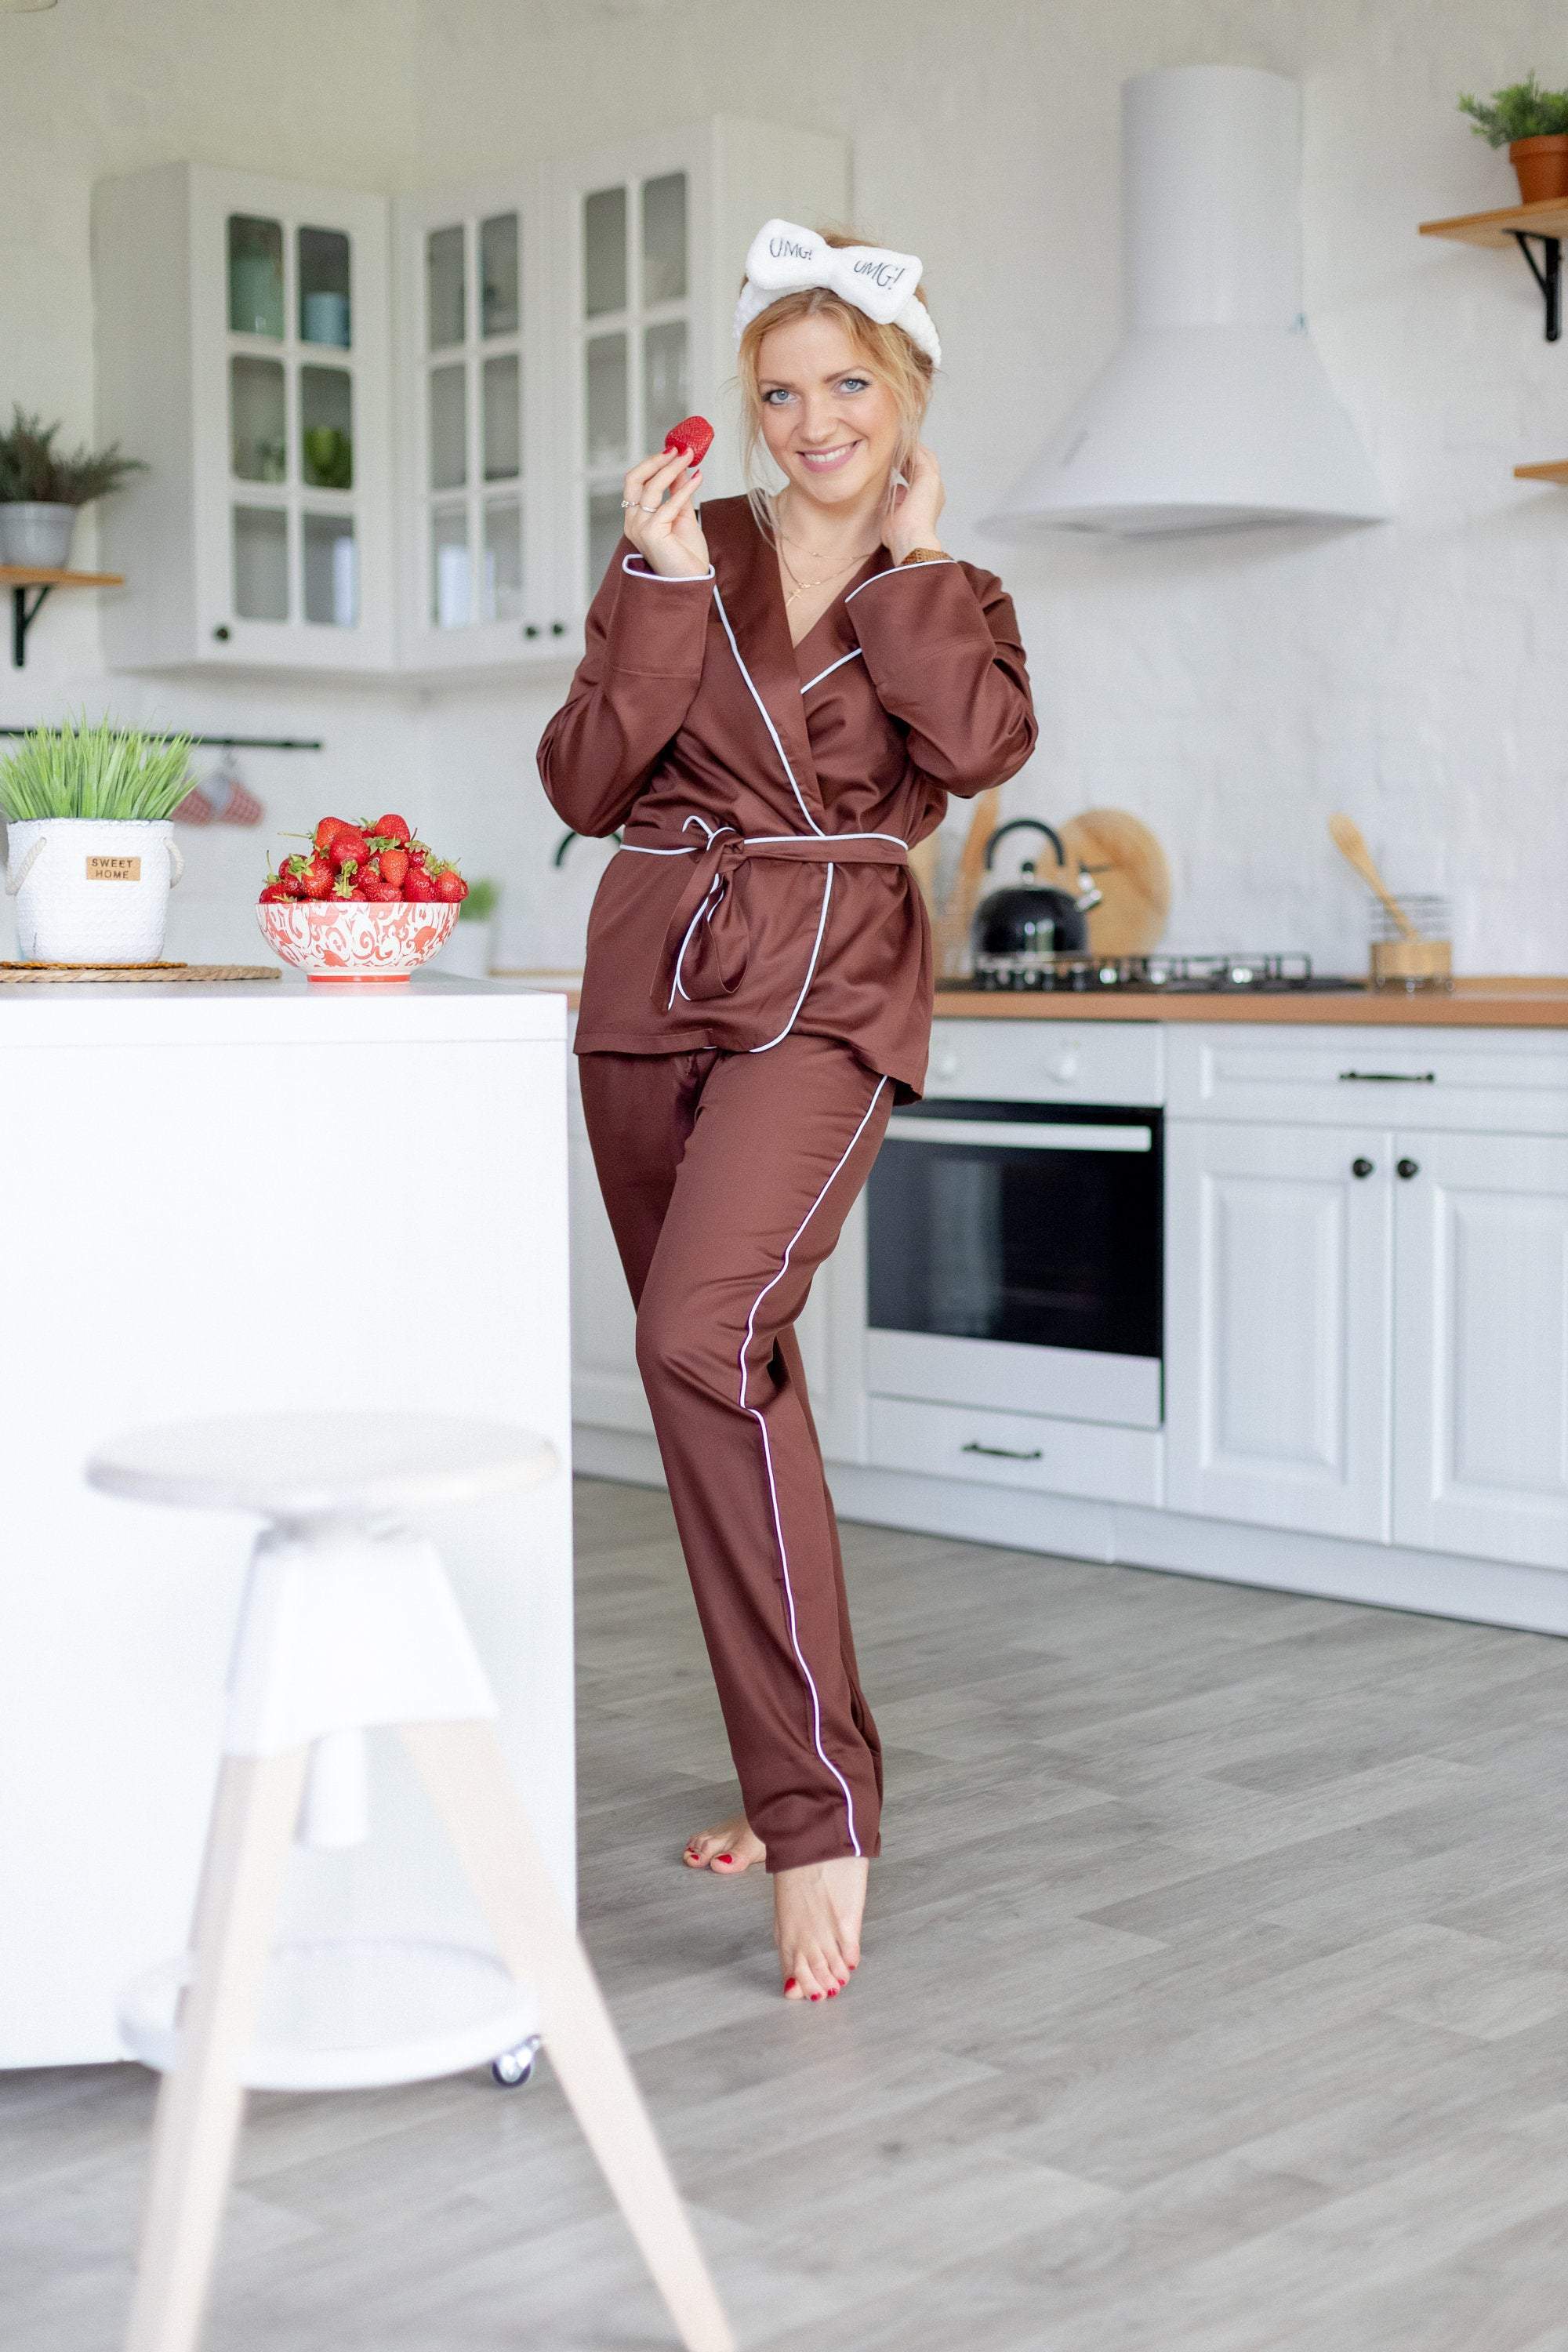 8 Best Pajama party outfit ideas  party outfit, pajama party outfit, pajama  set